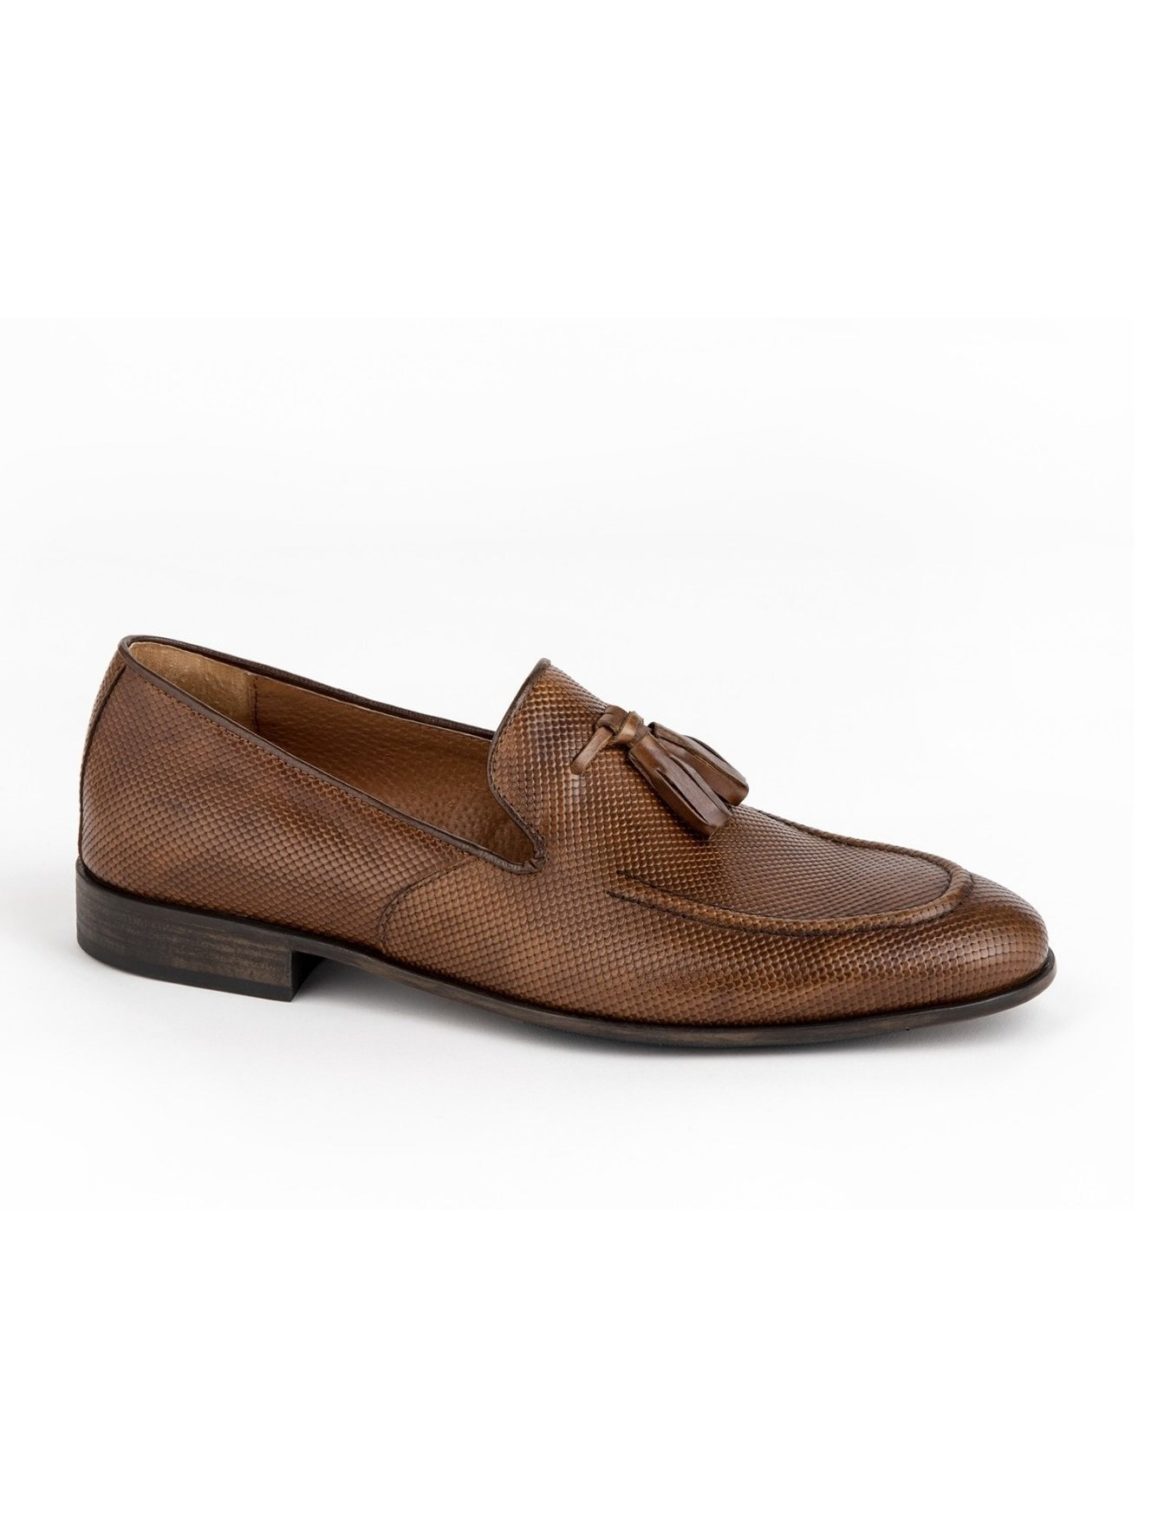 Fango Suede Loafer PHILIPPE LANG